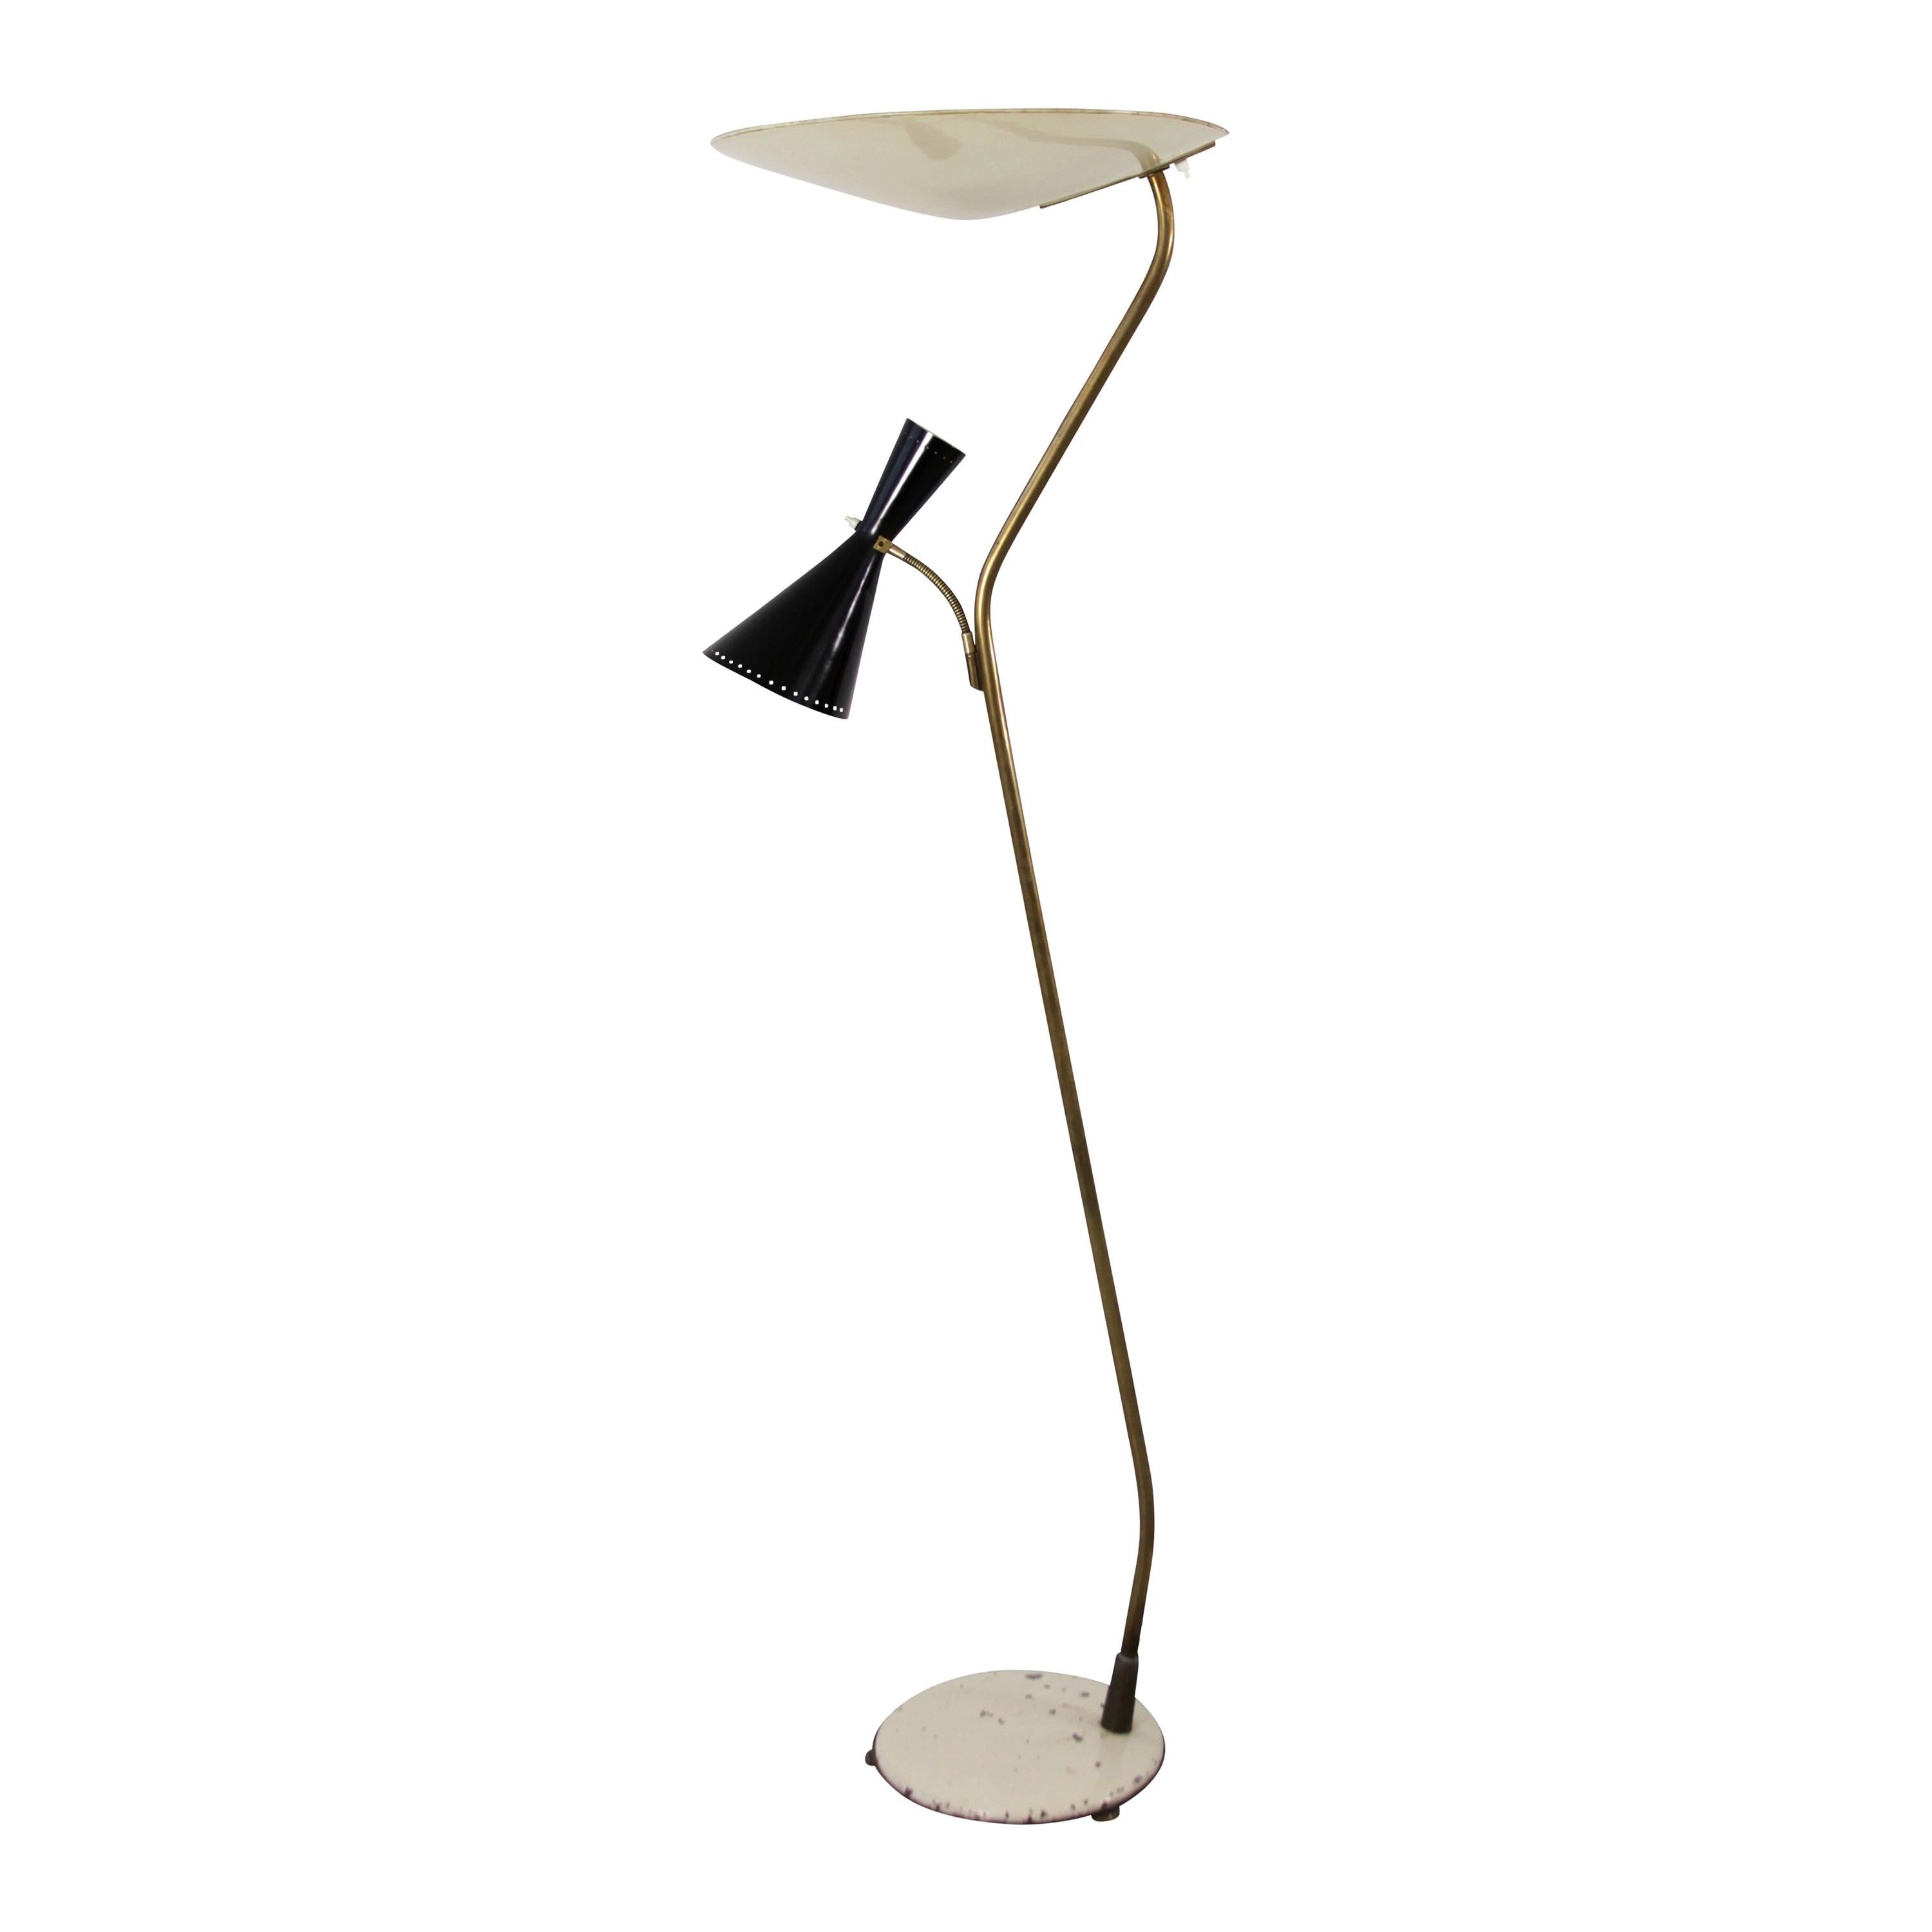 Floor Lamp with Lacquered Metal Shades, by Eberth Zürich, Switzerland, 1950s For Sale